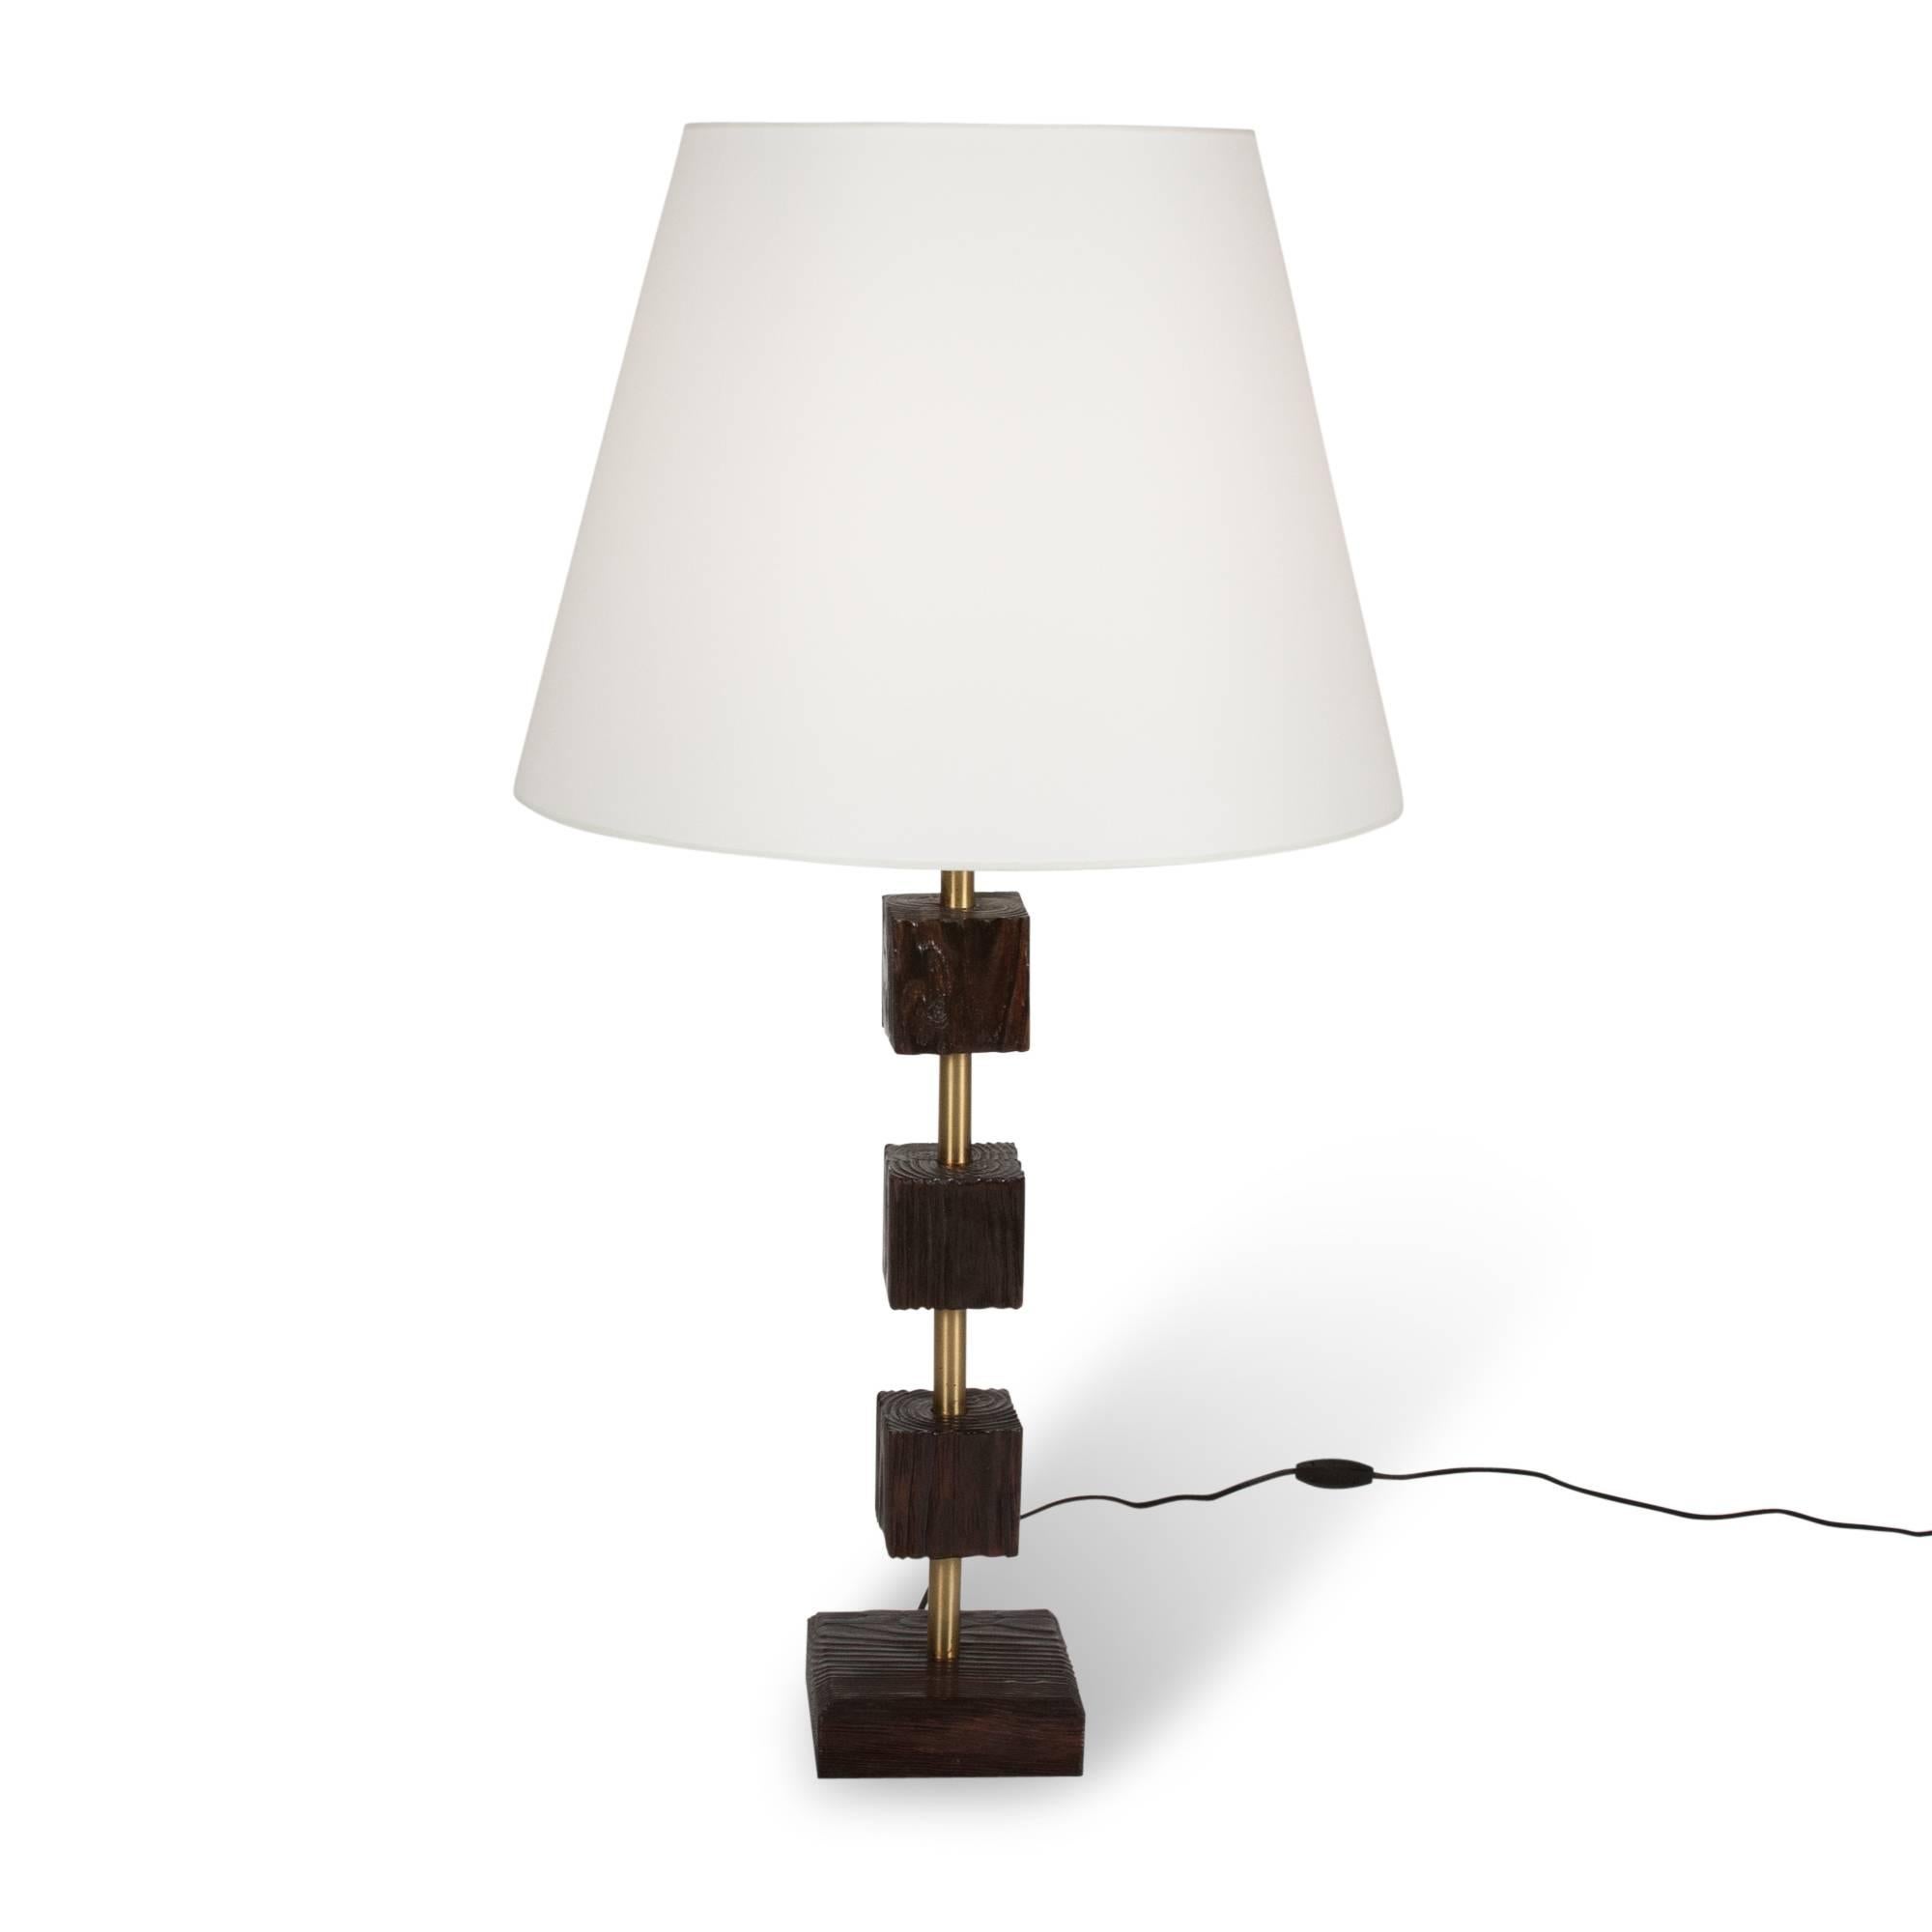 Bronze Pair of Ebonized Pine Table Lamps, American, 1950s For Sale